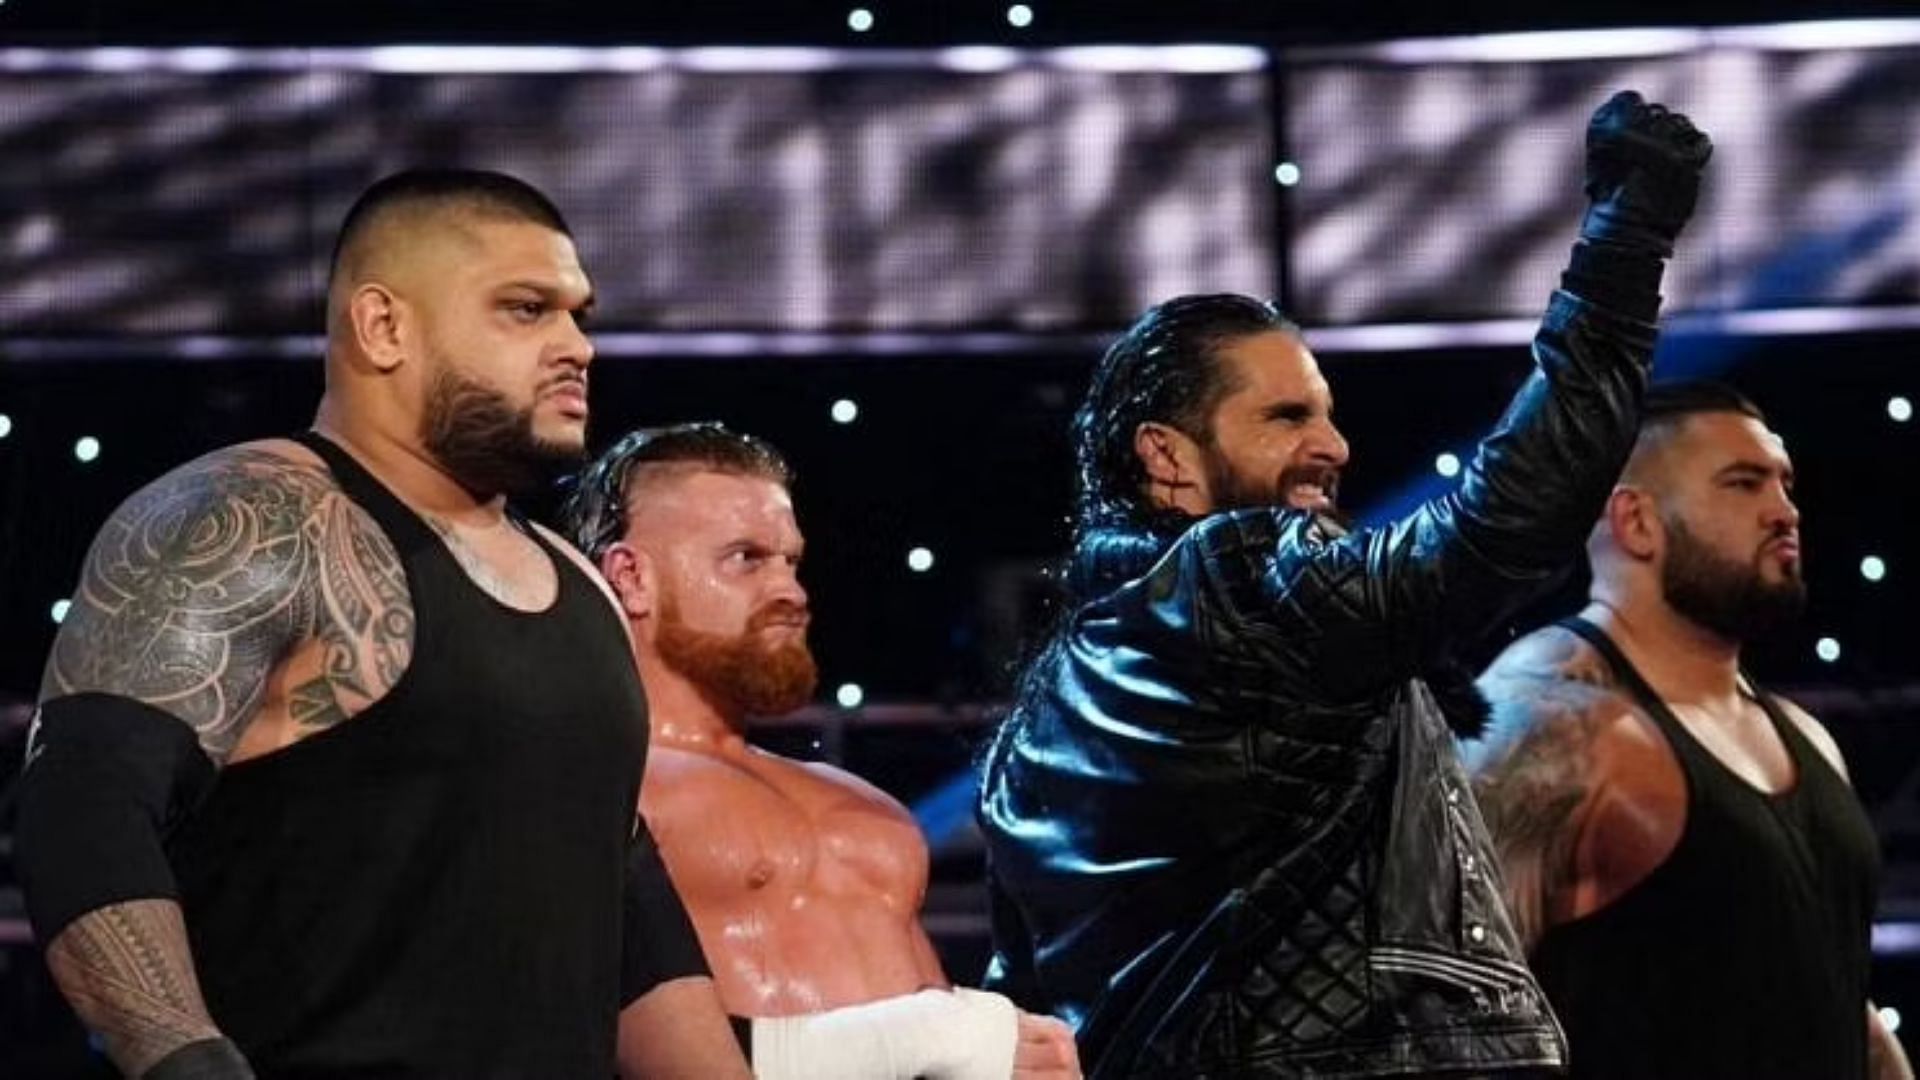 Seth Rollins led a faction consisting of Buddy Murphy and The Authors of Pain